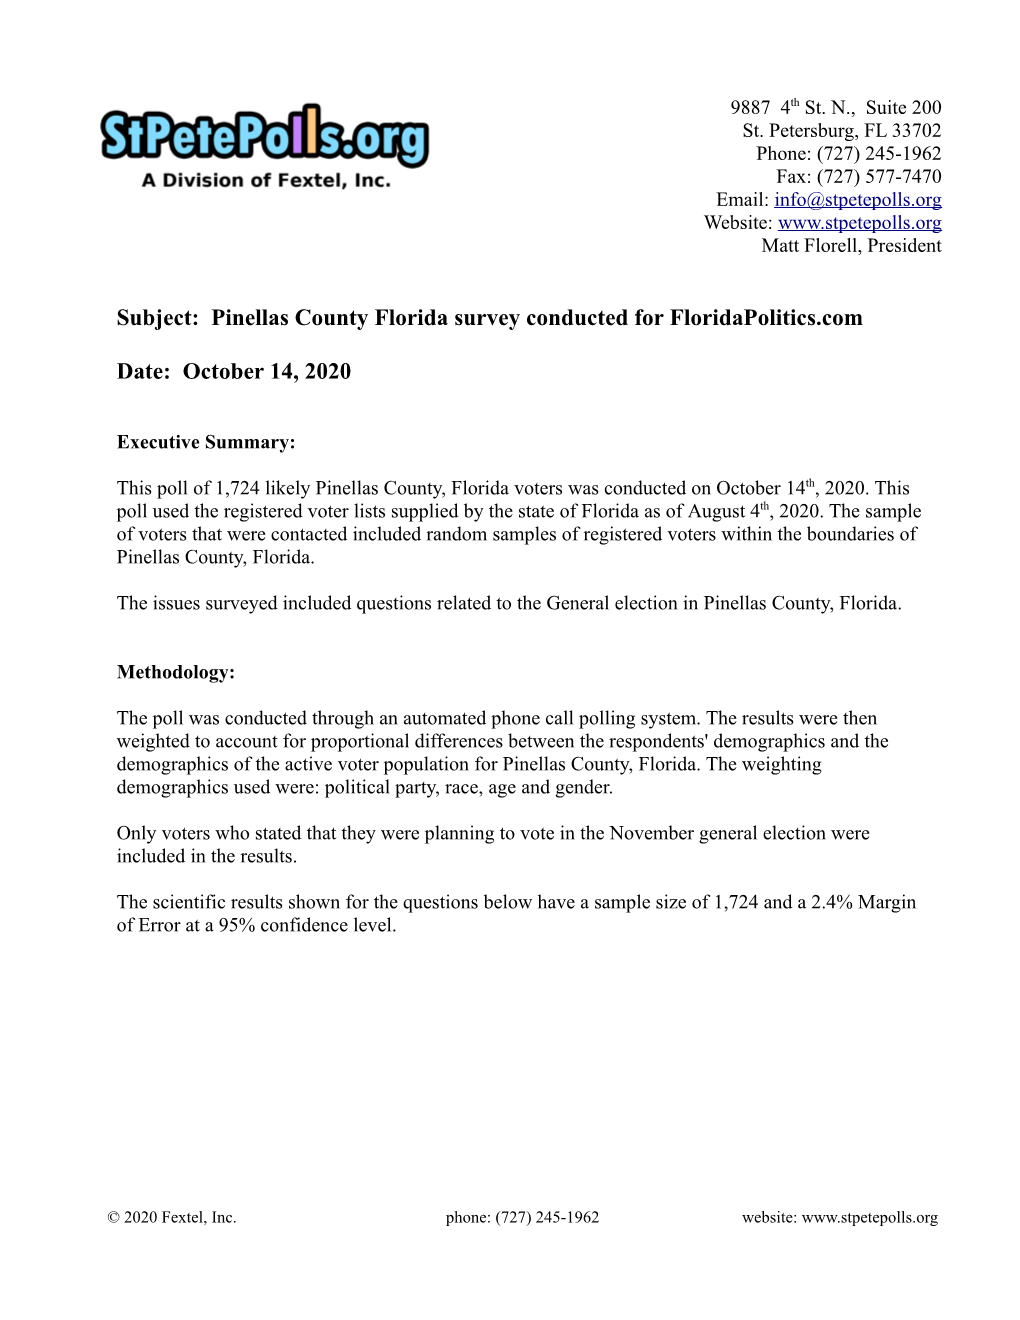 Subject: Pinellas County Florida Survey Conducted for Floridapolitics.Com Date: October 14, 2020